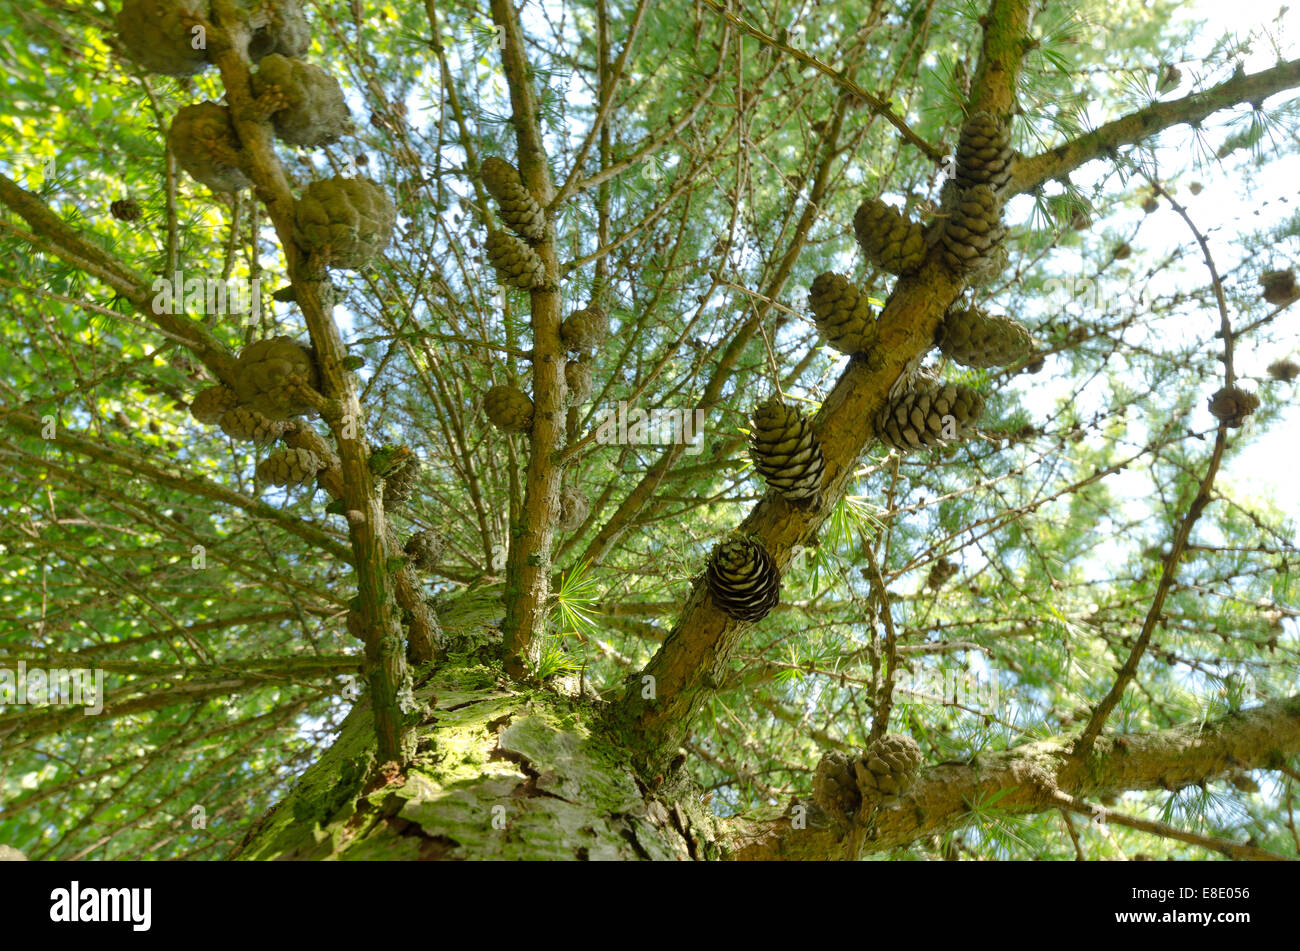 fresh lush greens of deciduous larch tree heavily laden with lots of ripe pine cones on rows of branches pointing upwards Stock Photo